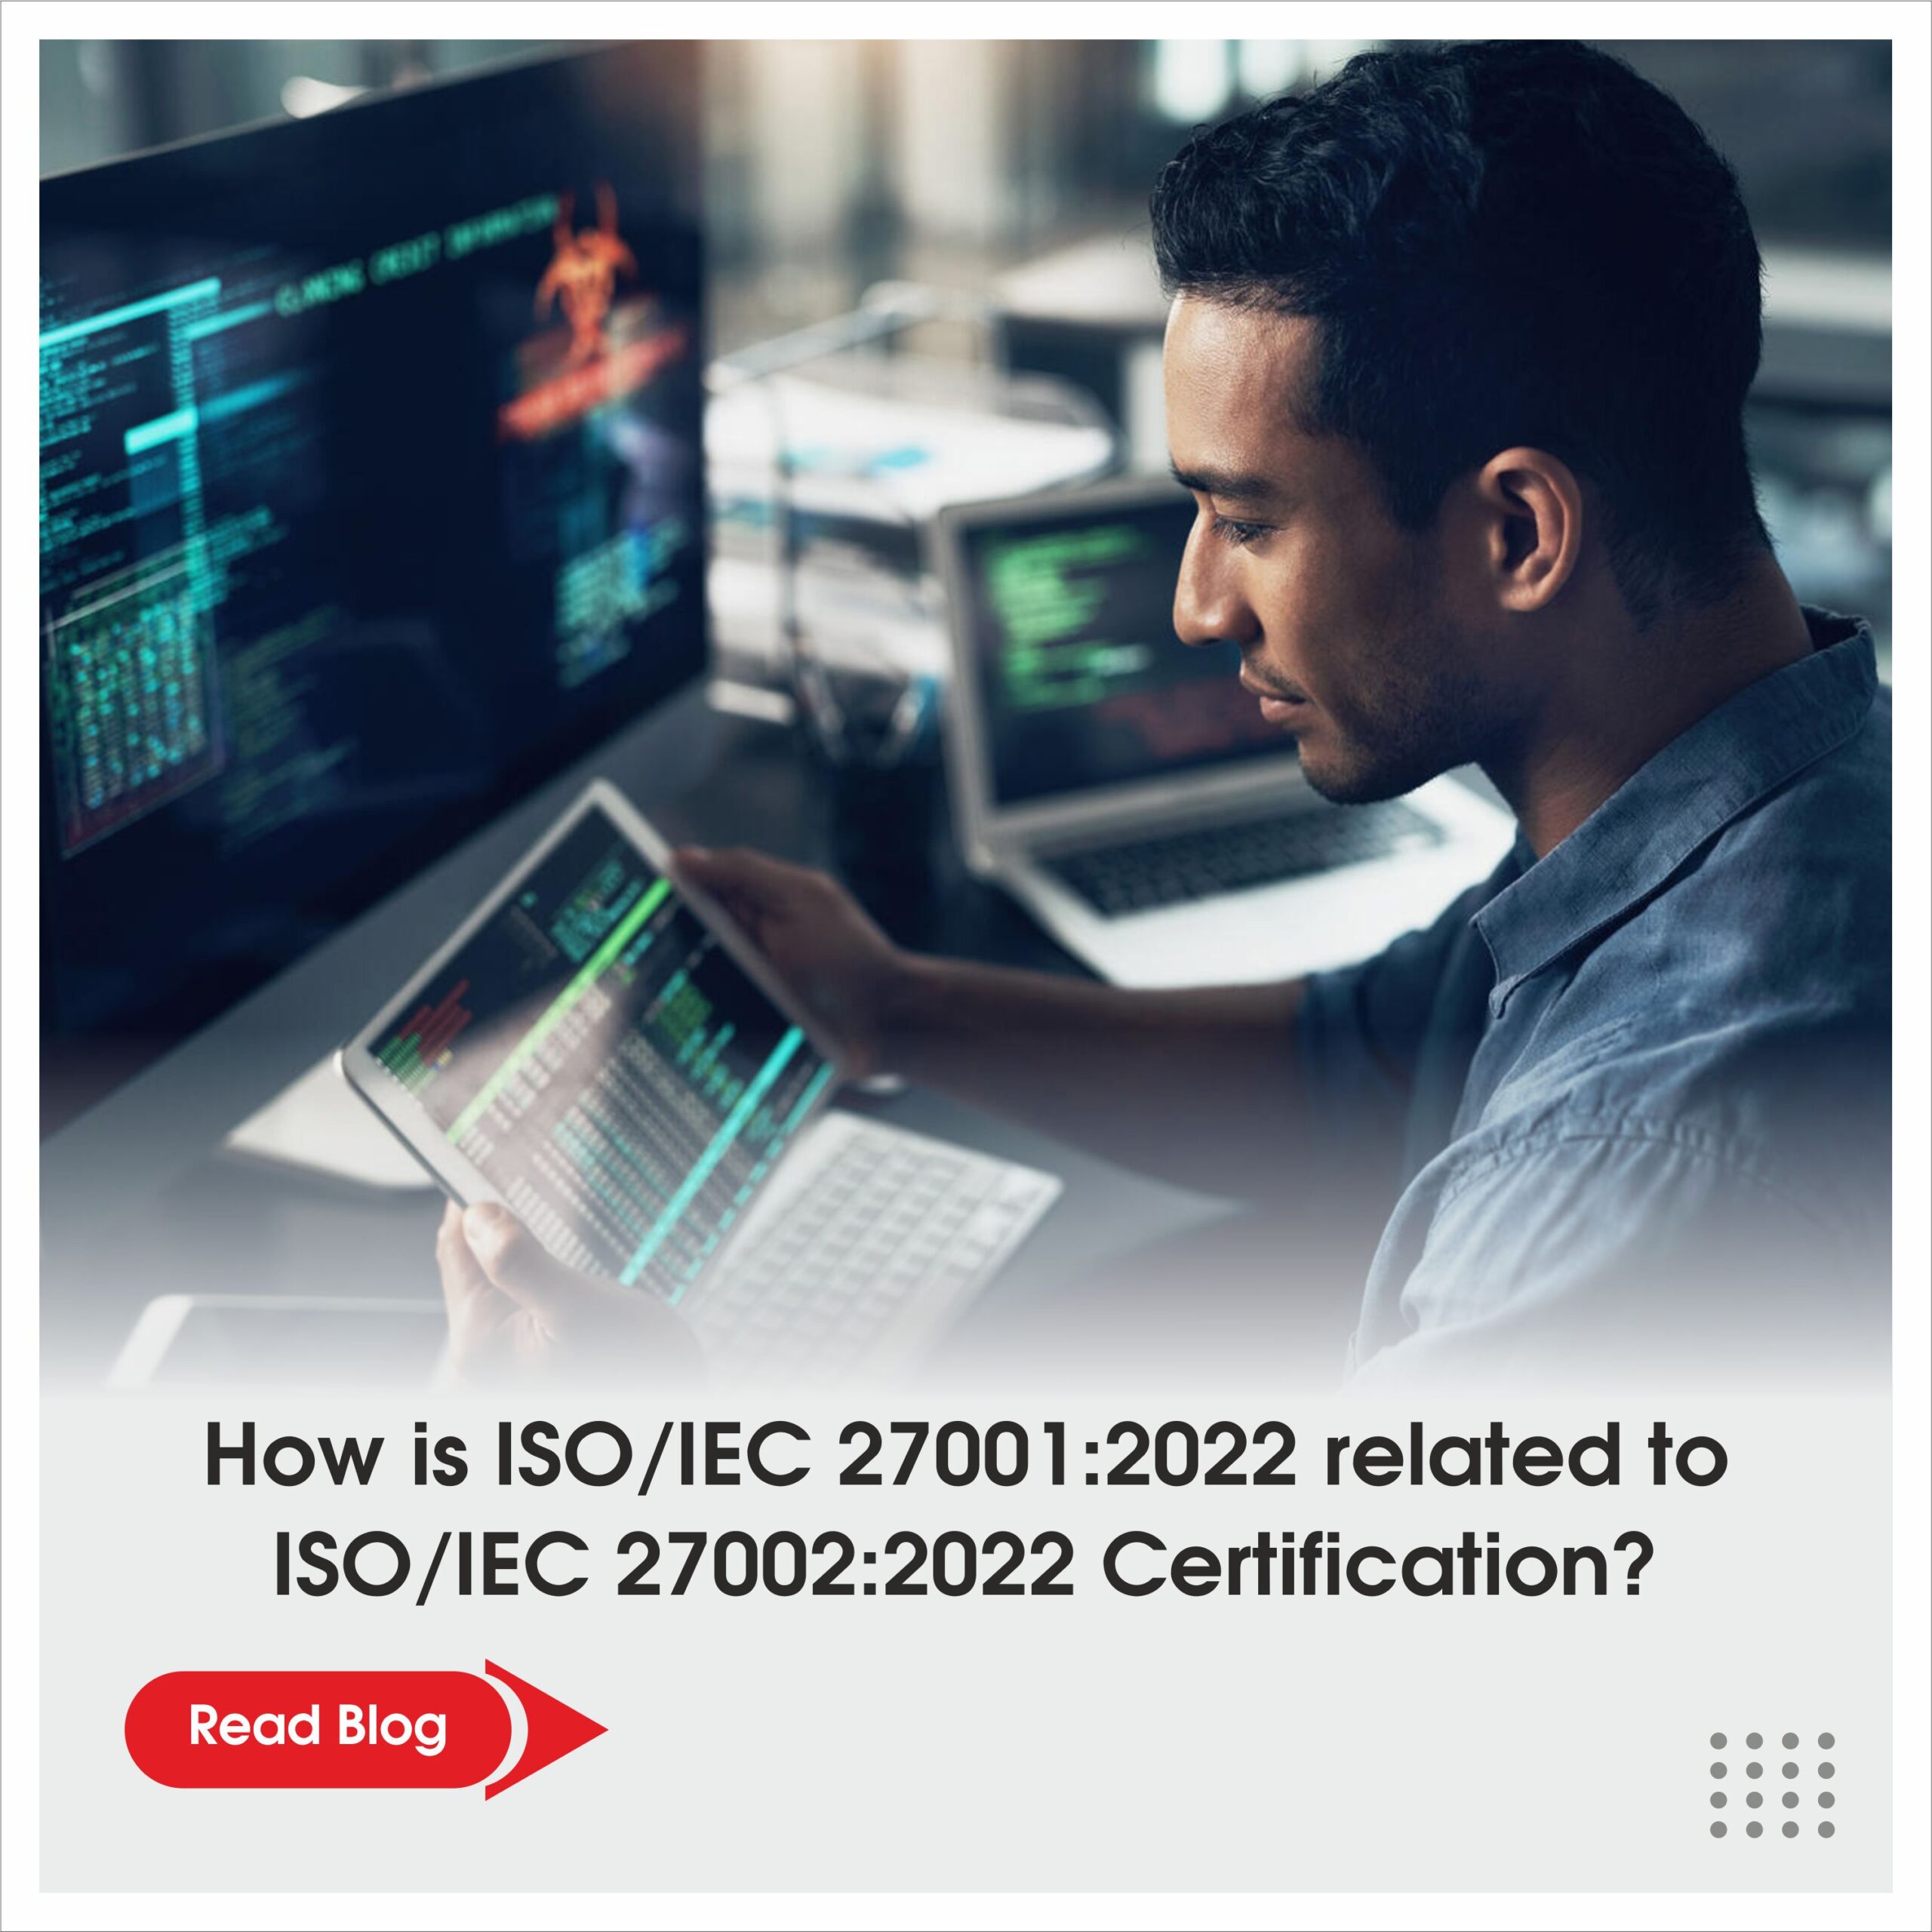 How is ISO/IEC 27001:2022 related to ISO/IEC 27002:2022 Certification?